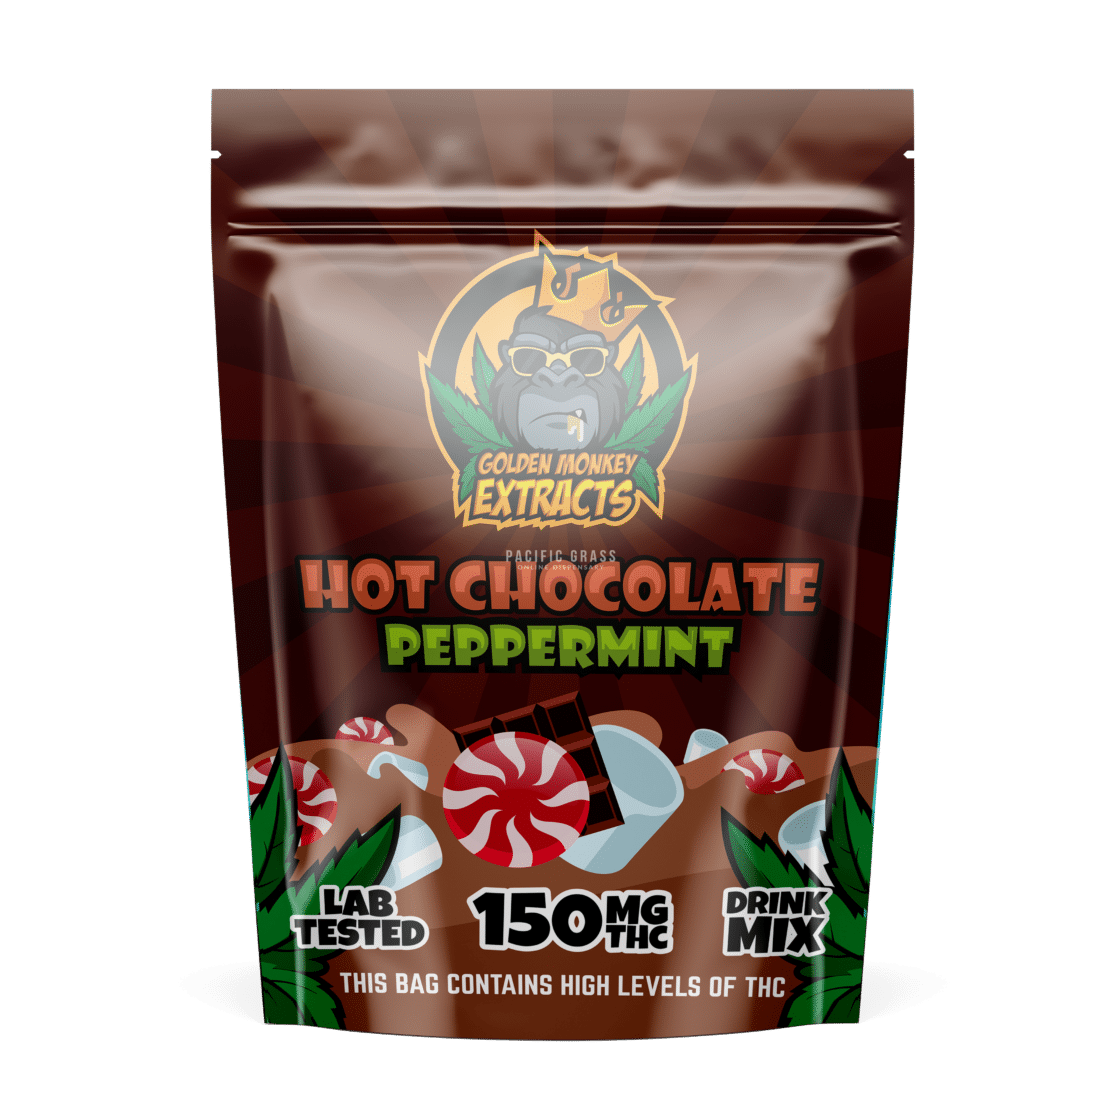 Golden monkey extracts – 150mg hot chocolate drink mix – milk chocolate